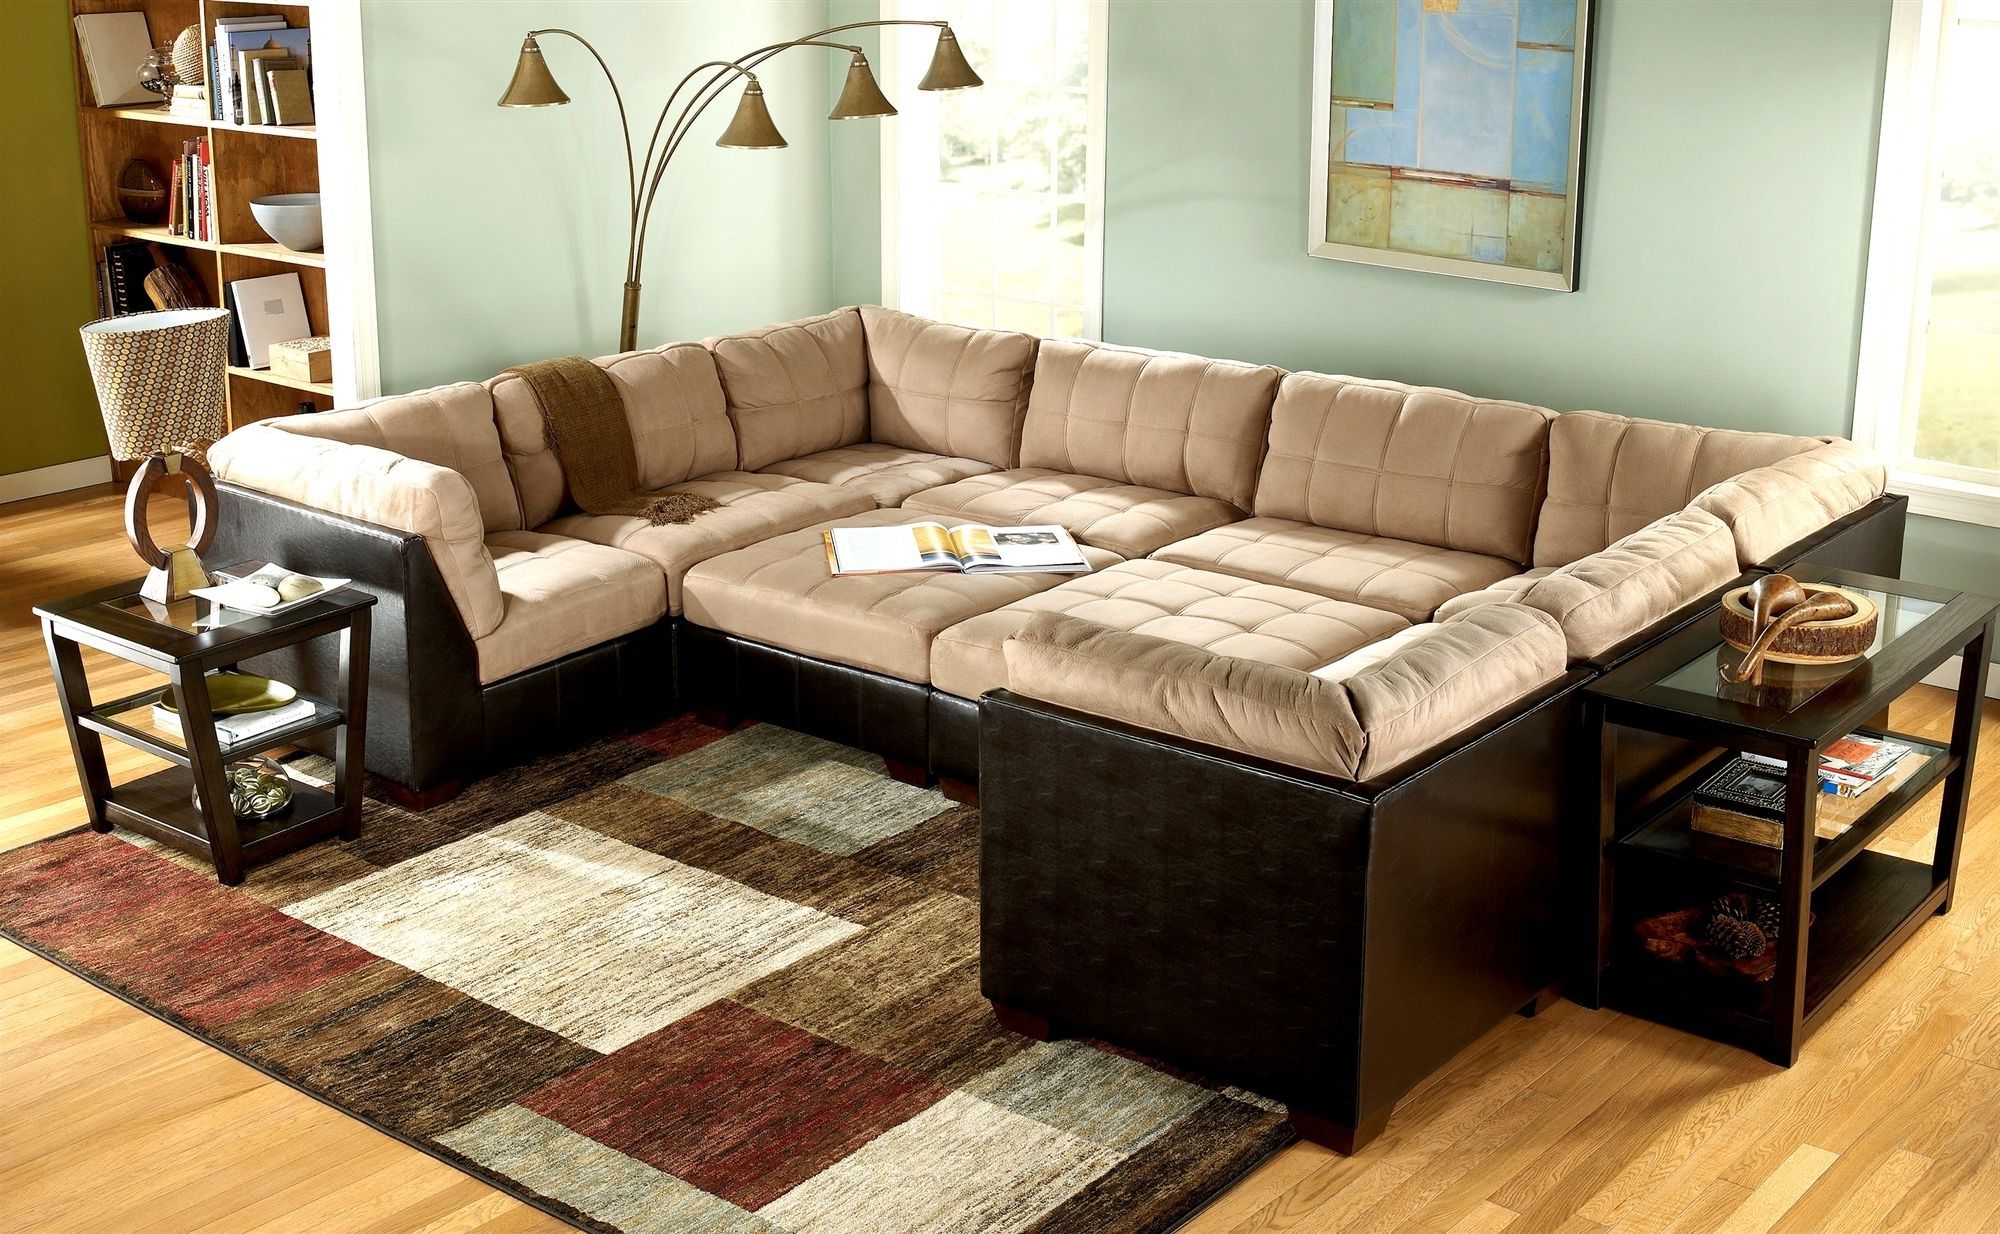 Most Recently Released Sectional Sofas In Savannah Ga With Regard To Furniture: American Freight Sectionals For Luxury Living Room (View 6 of 15)